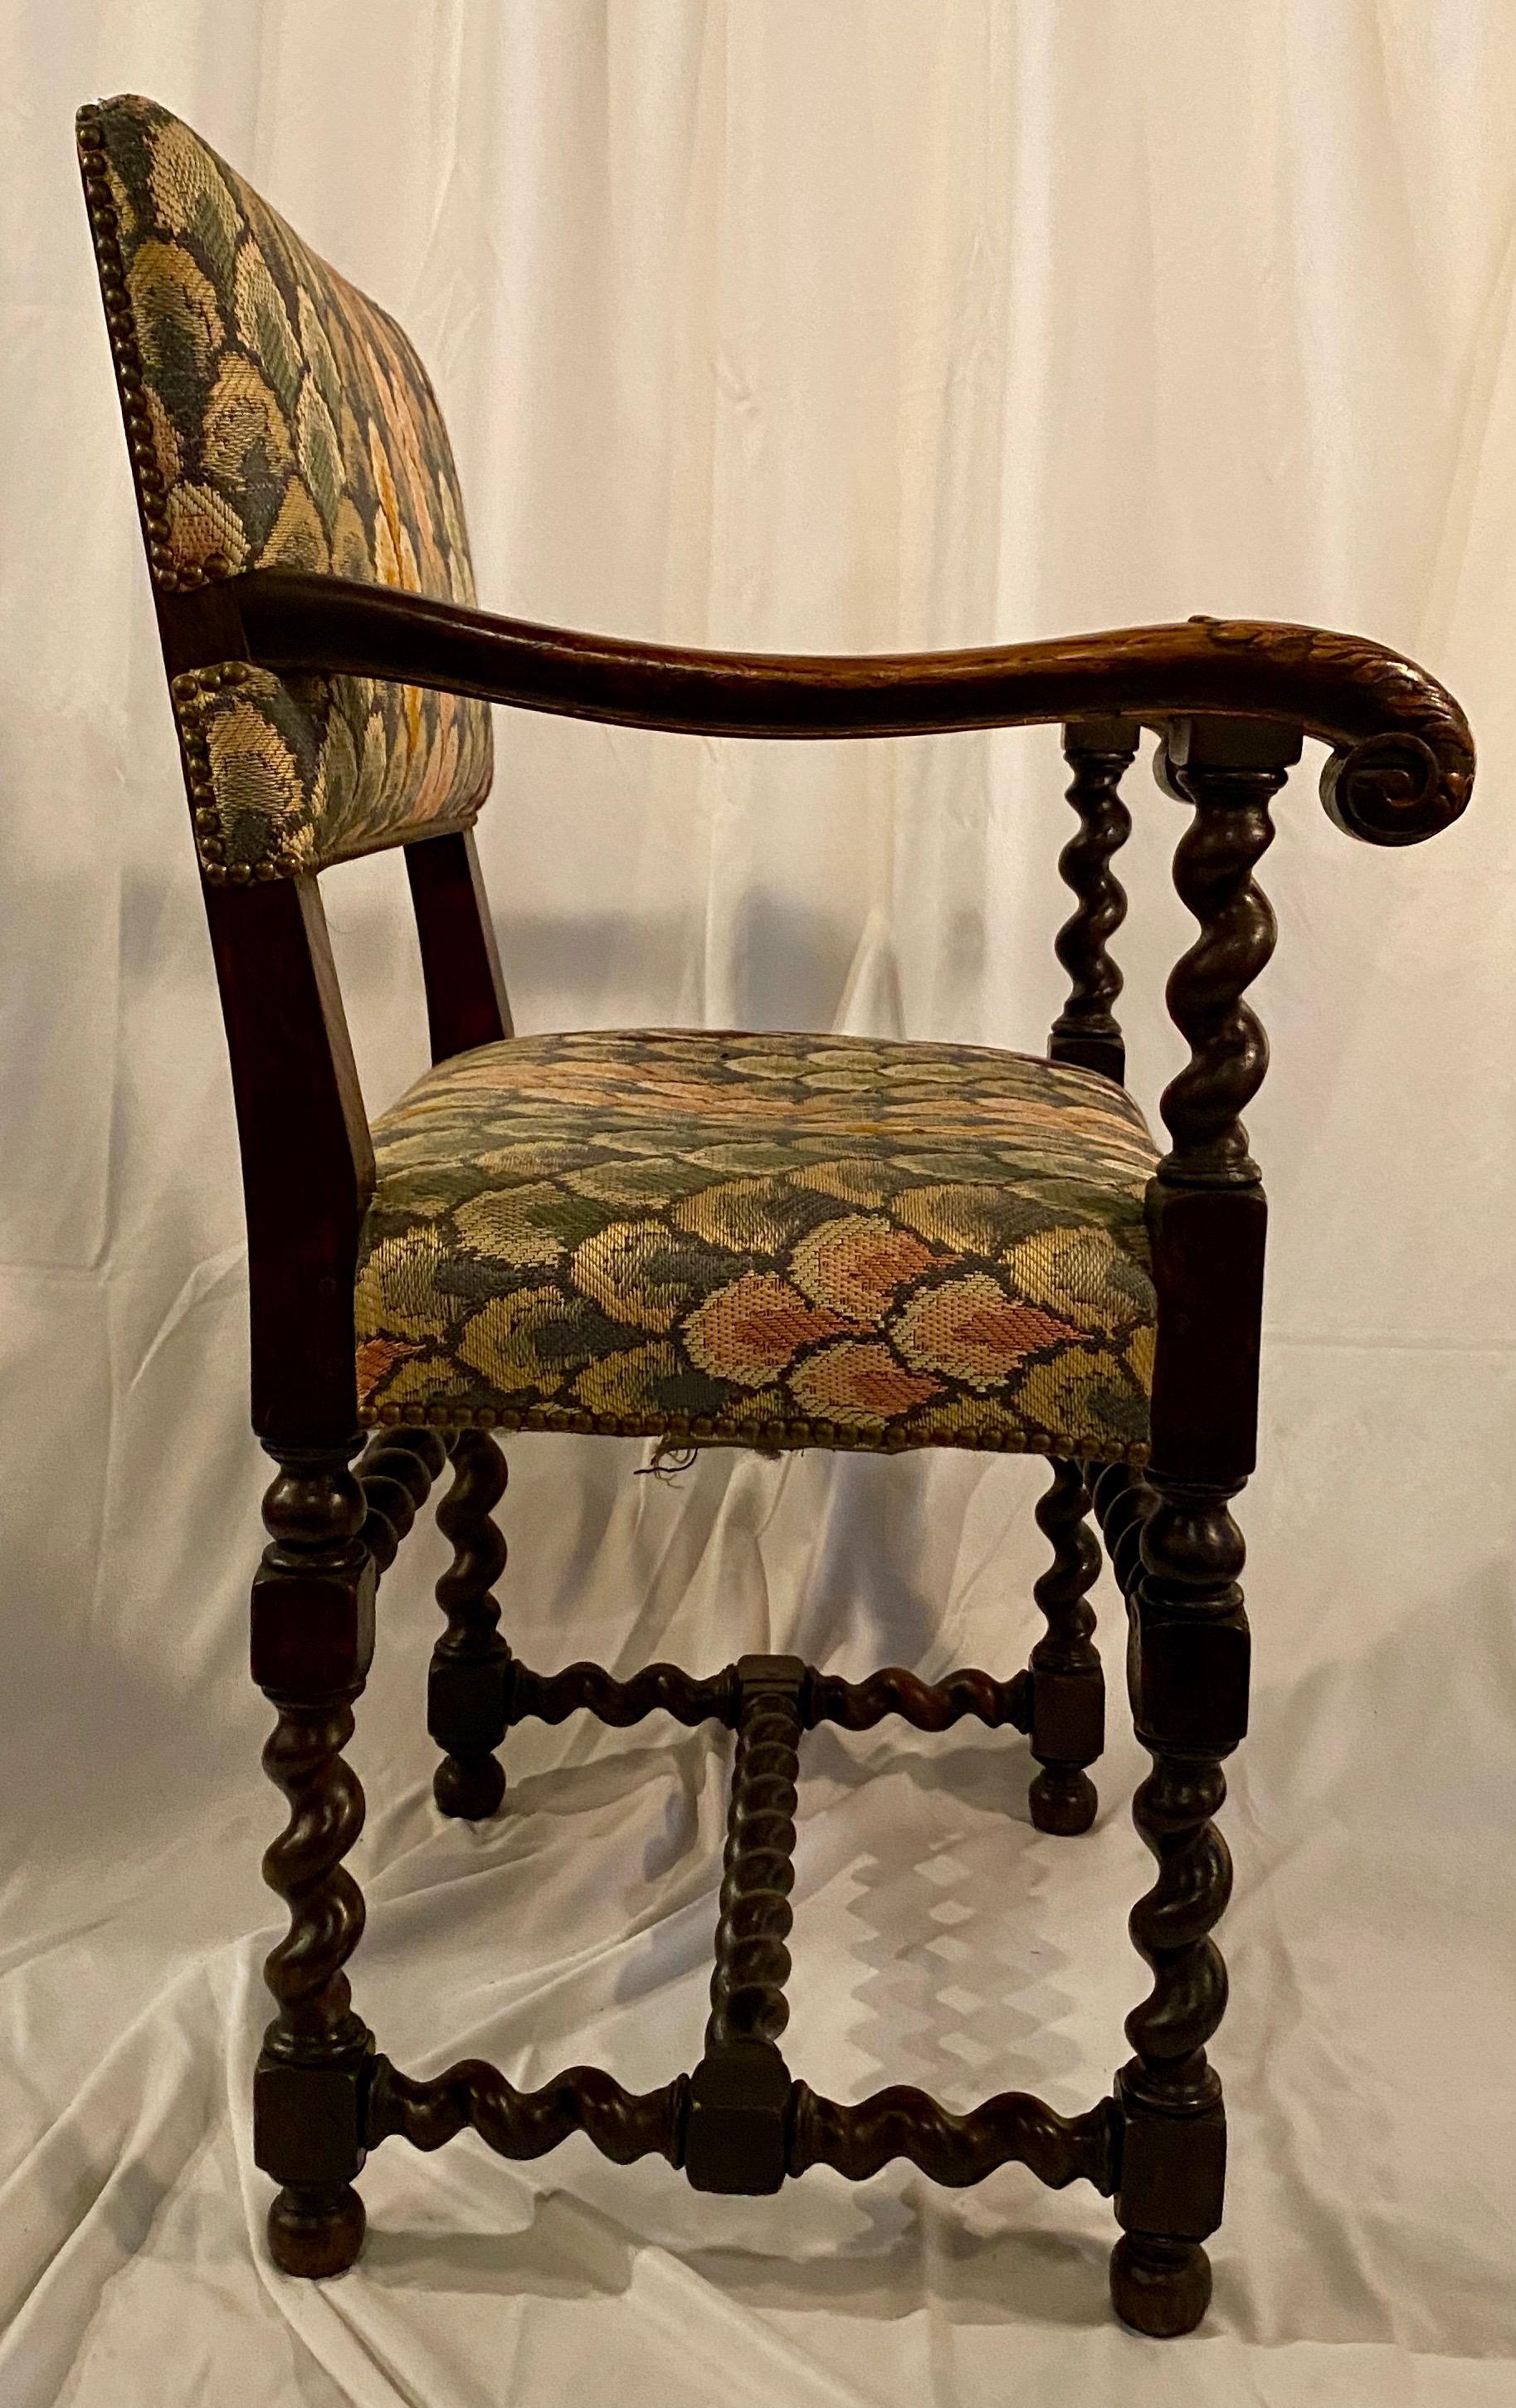 Nicely carved chairs that are solid and will stand the rigors of use.